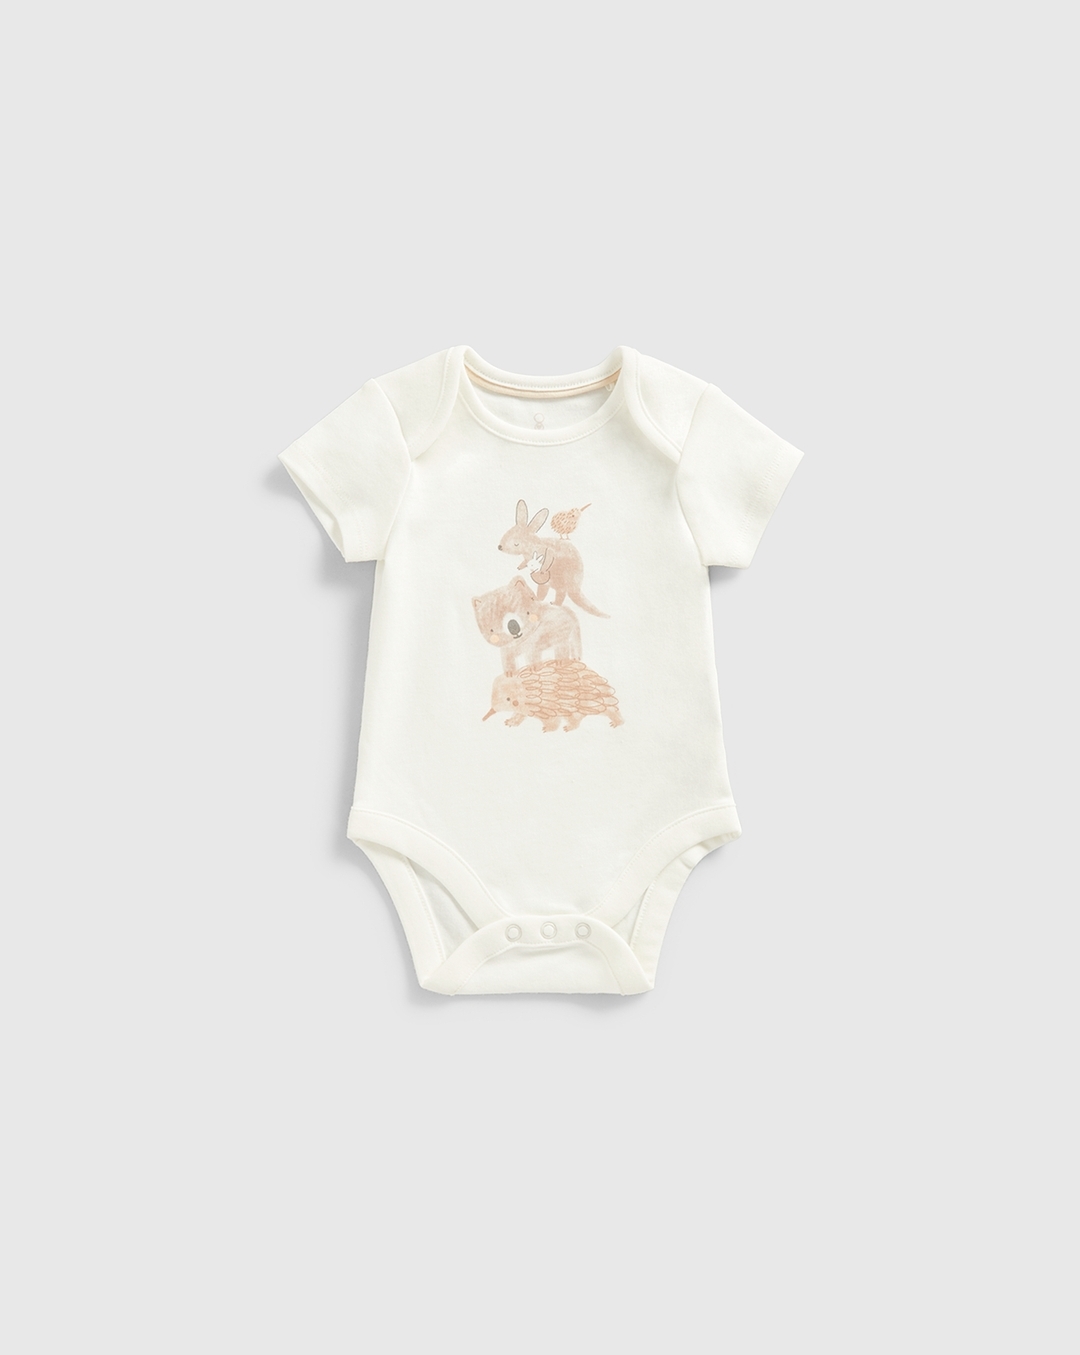 Pin by Emma {Cut & Stick Design} on Baby | Premature baby, Baby outfits  newborn, New baby products